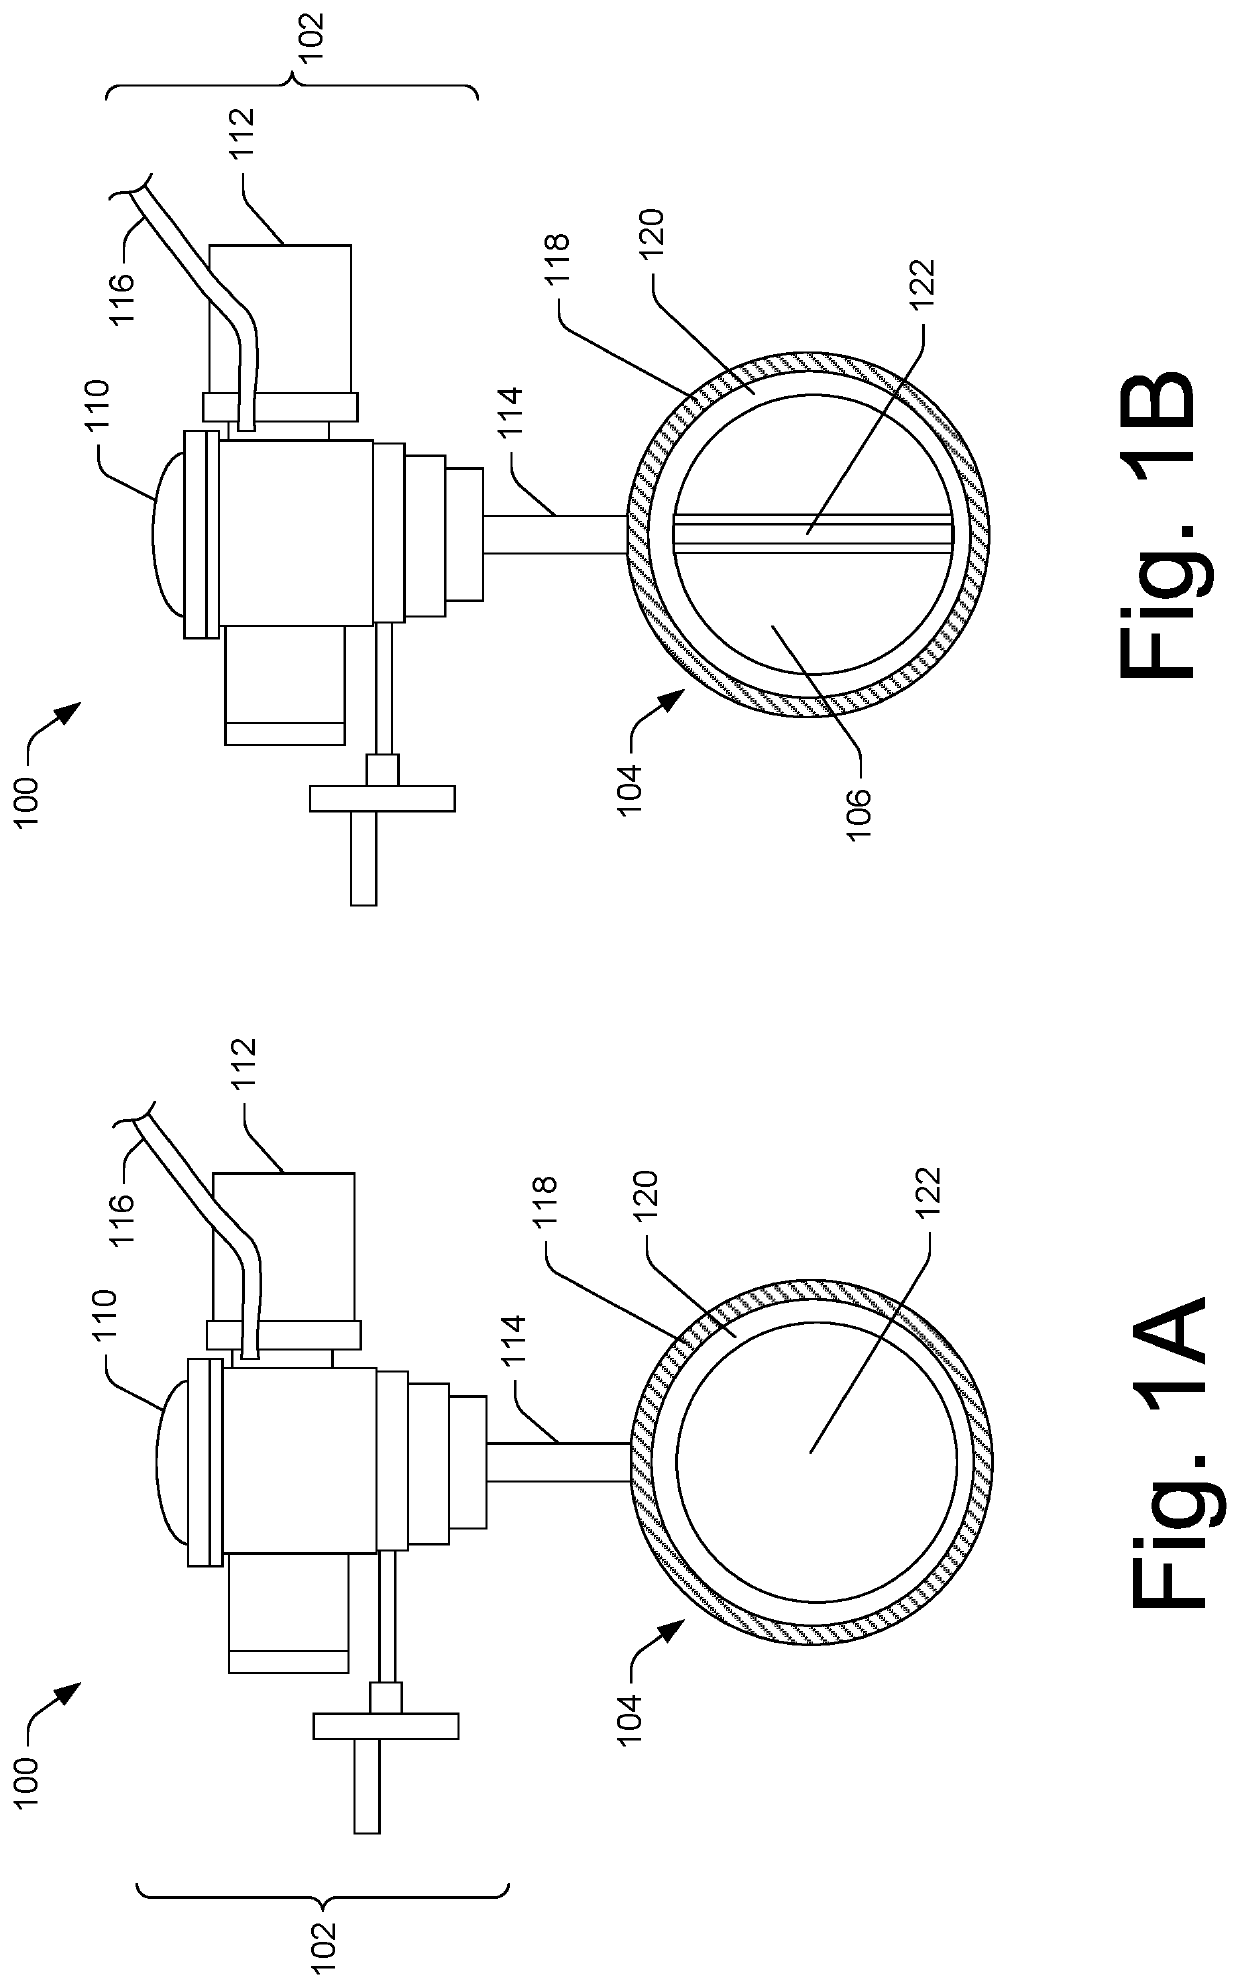 Systems and methods for using calibration profiles in valve actuators